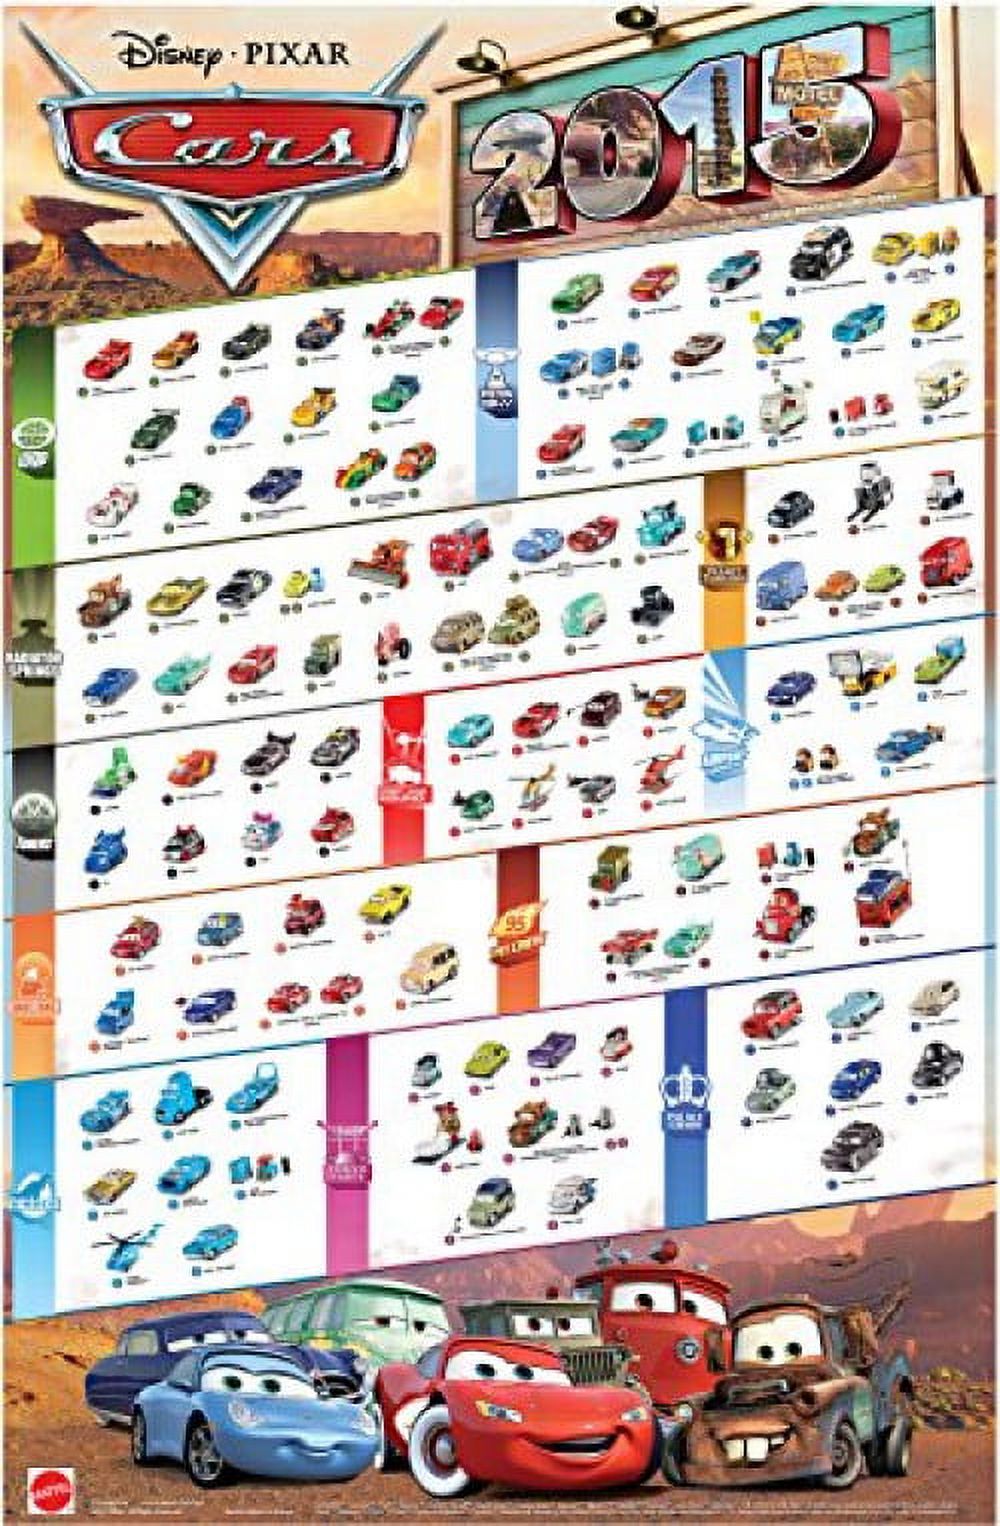 Cars - Disney Cars Character Assortment - image 2 of 2